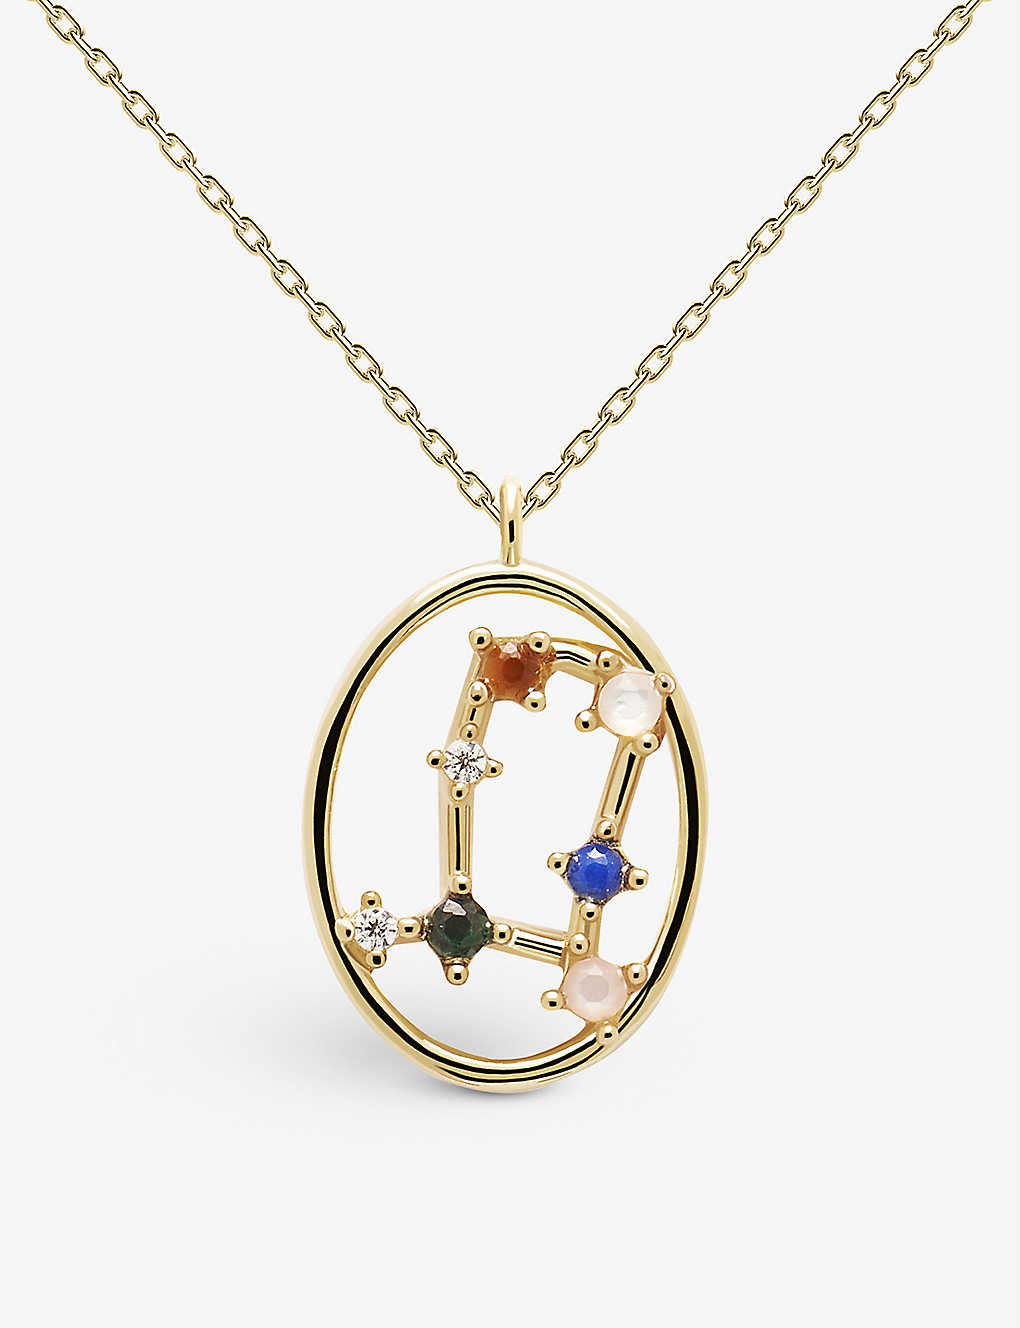 Gemini Pendant with 16 Necklace 14K Rose Gold-plated 925 Silver Zodiac Jewels Obsession Zodiac Gemini Necklace 